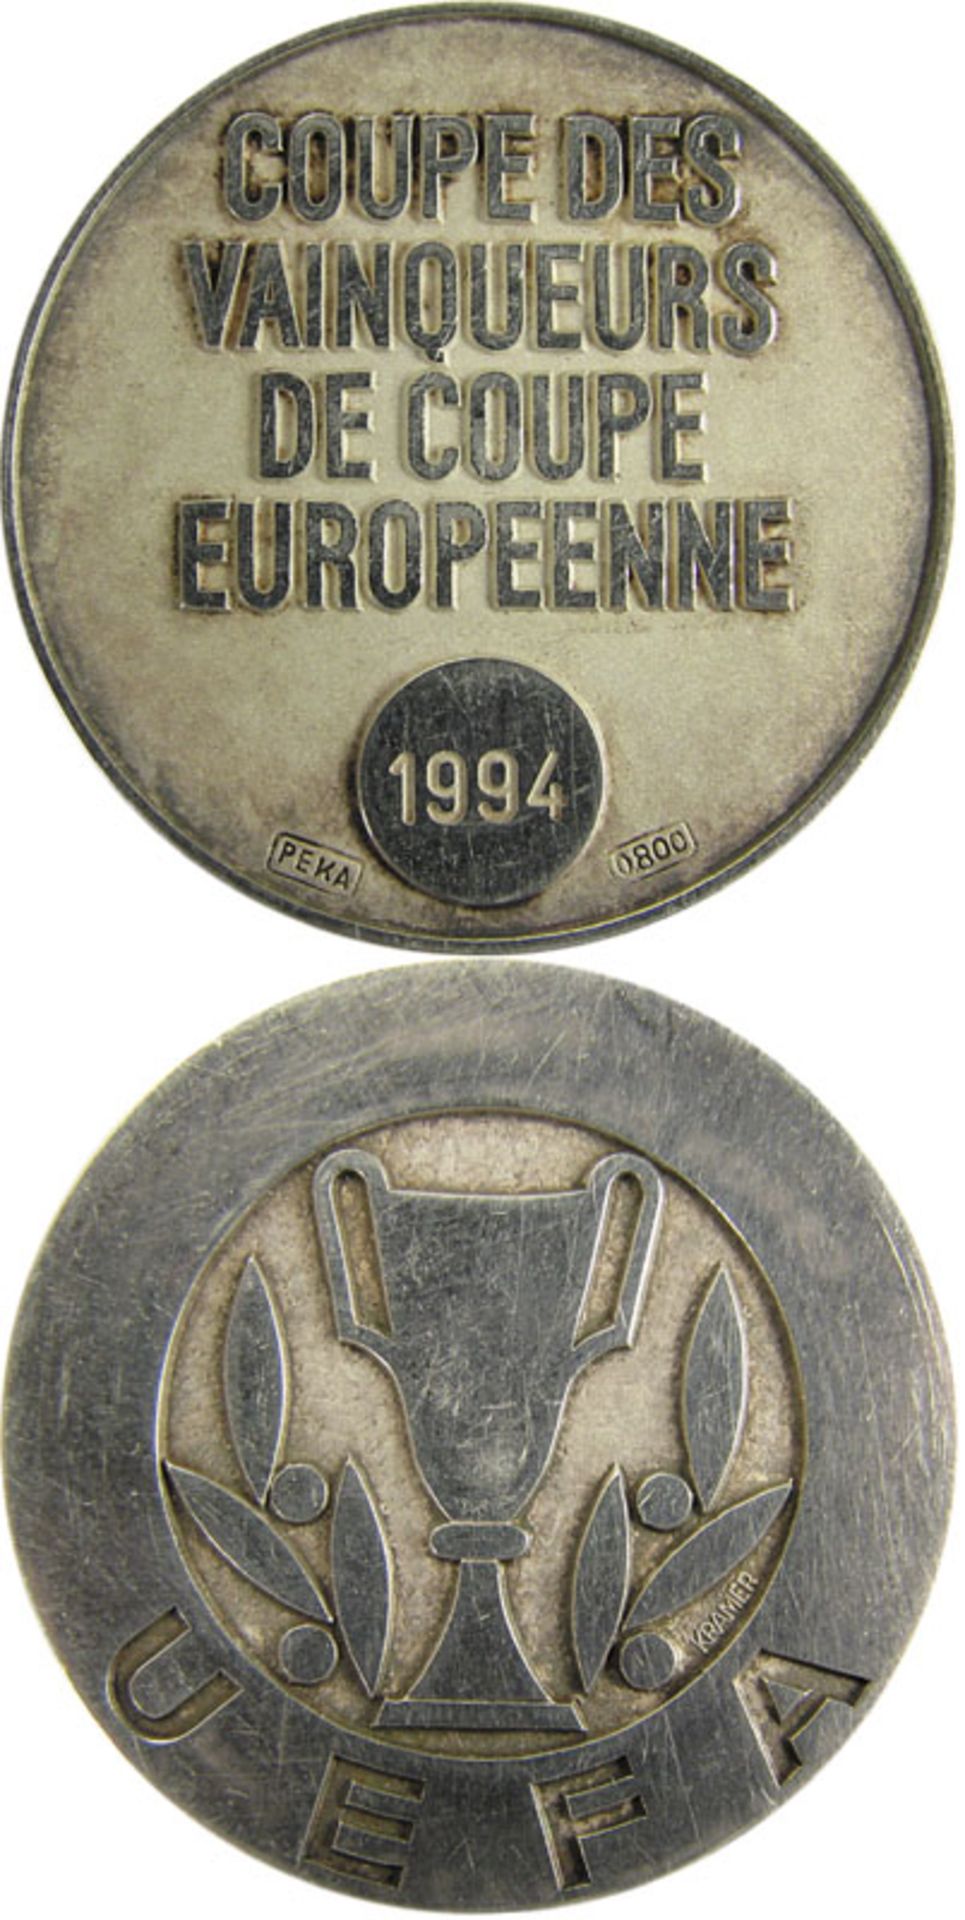 Winner's Medal UEFA Cup 1994 Parma FC - Official medal for the runner up of the UEFA Cup final in Co